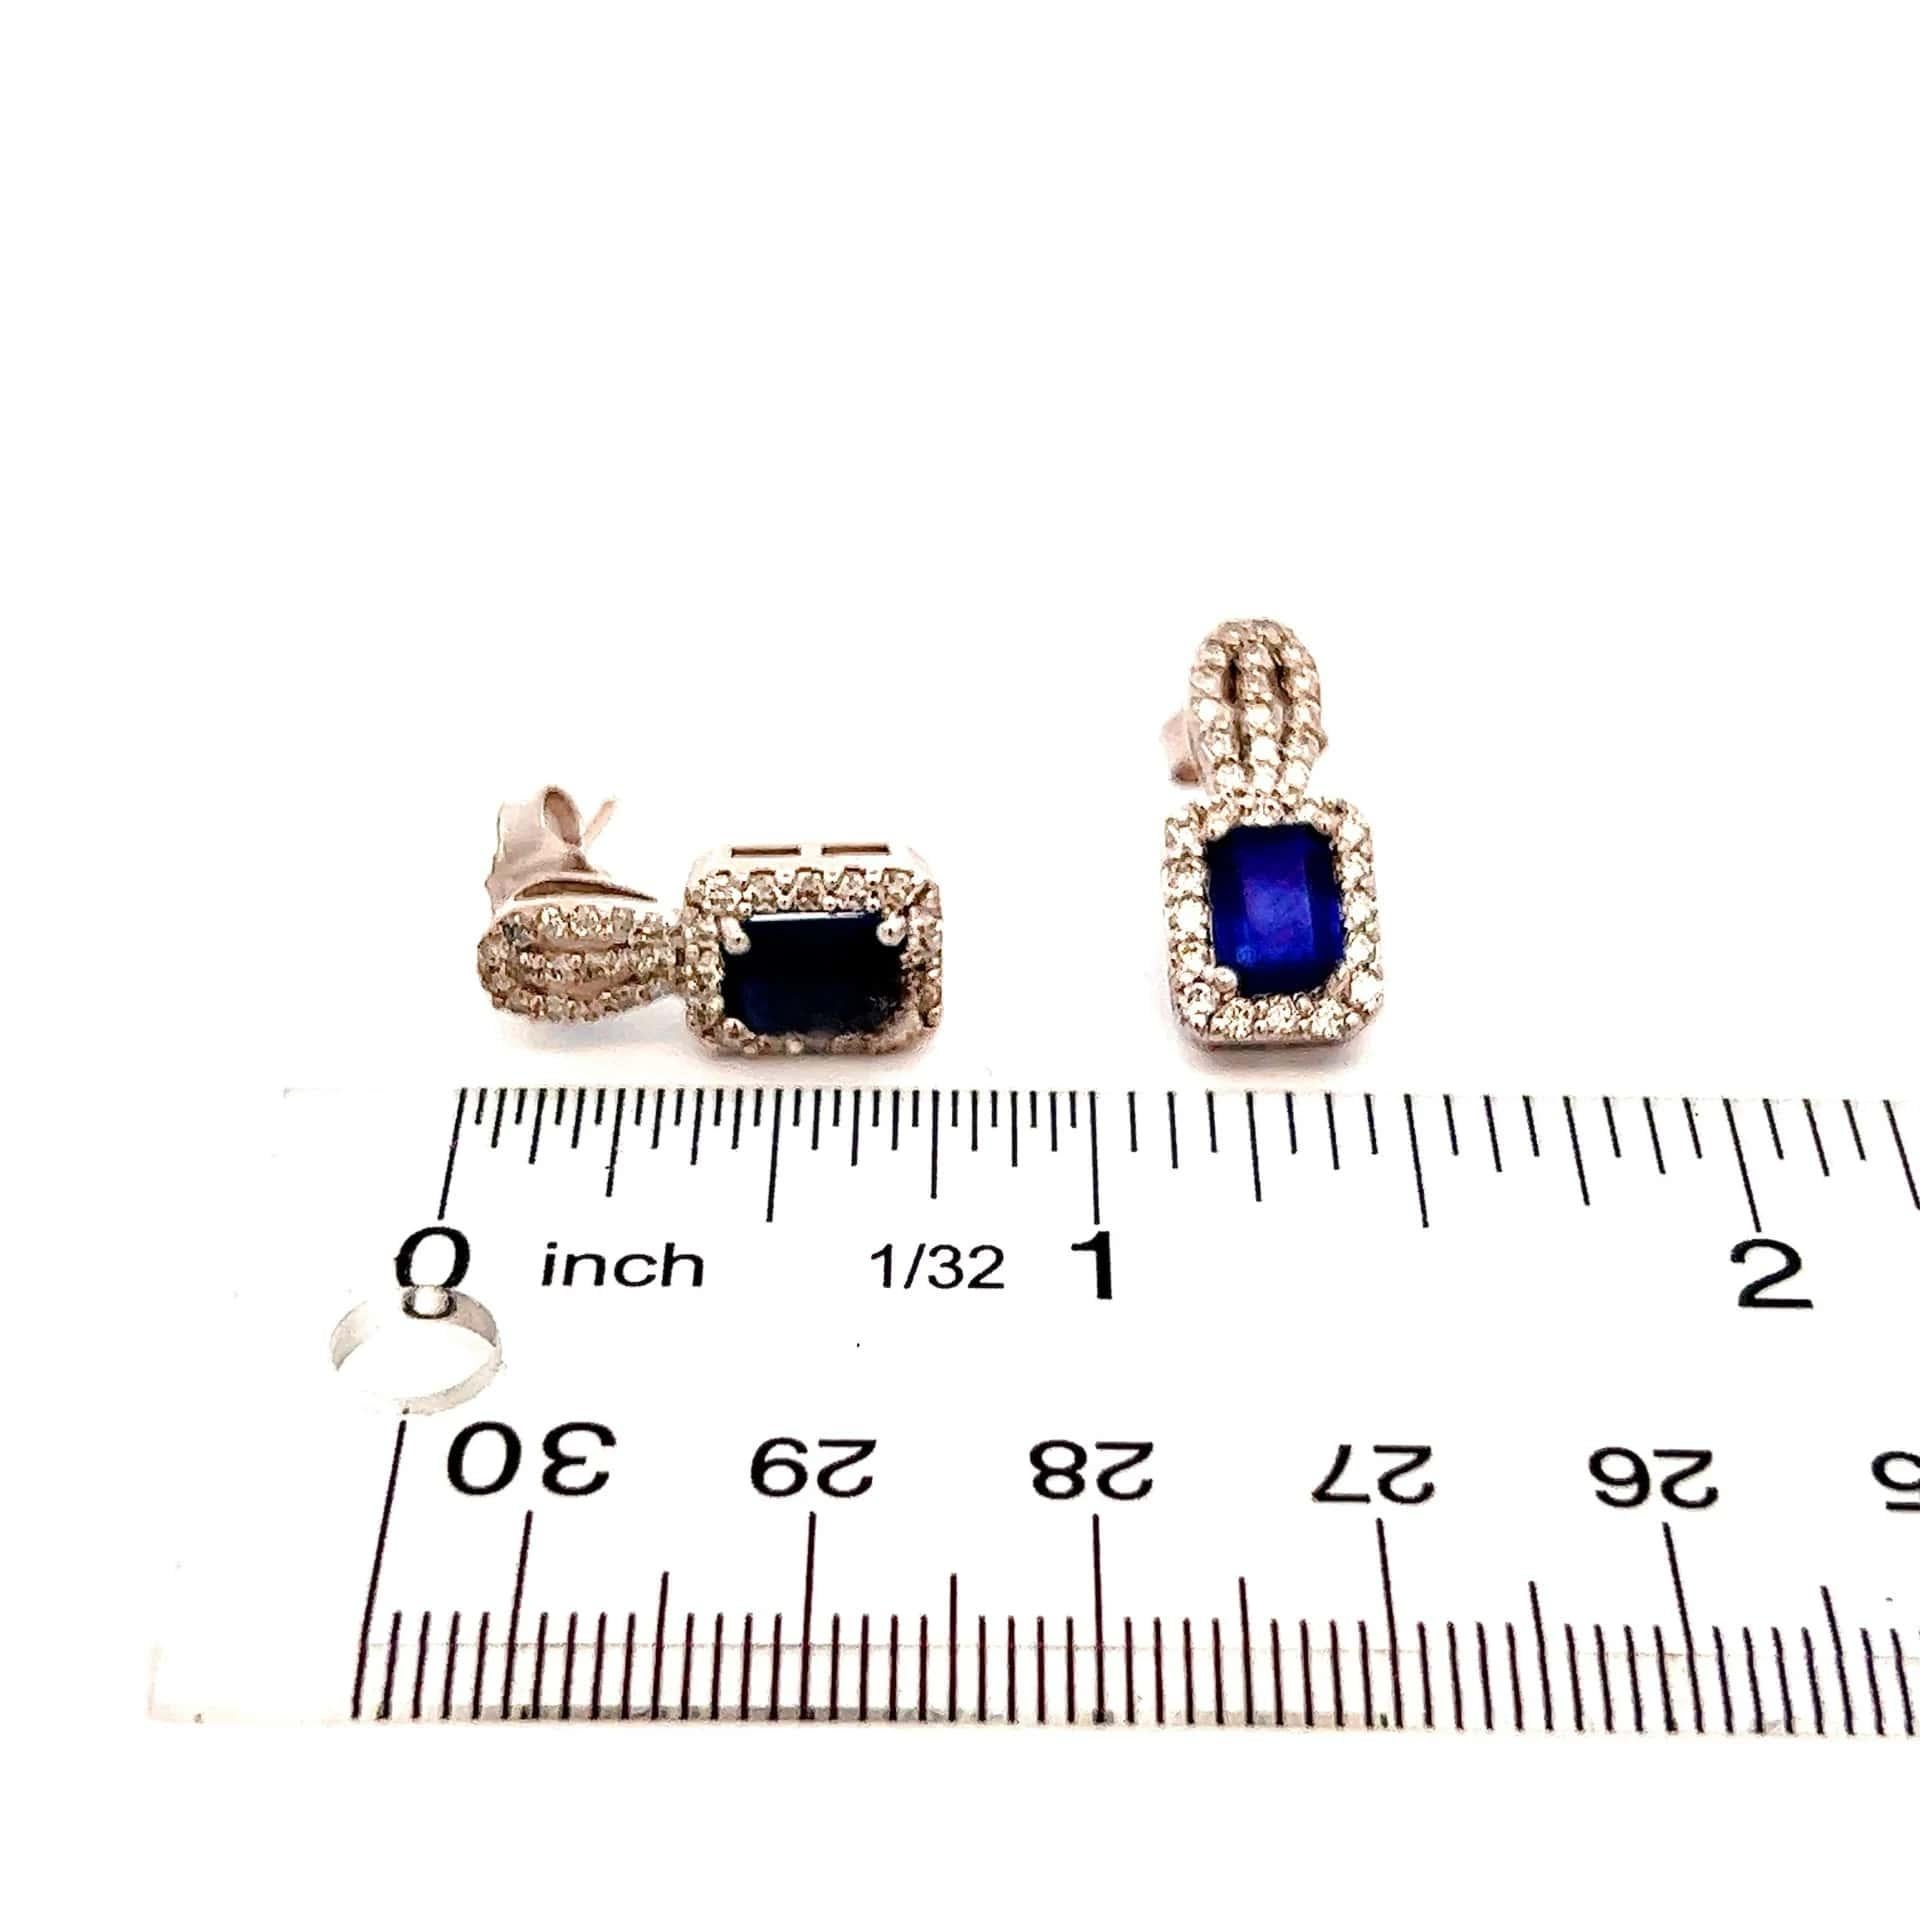 Natural Sapphire Diamond Earrings 14k W Gold 2.84 TCW Certified  For Sale 7